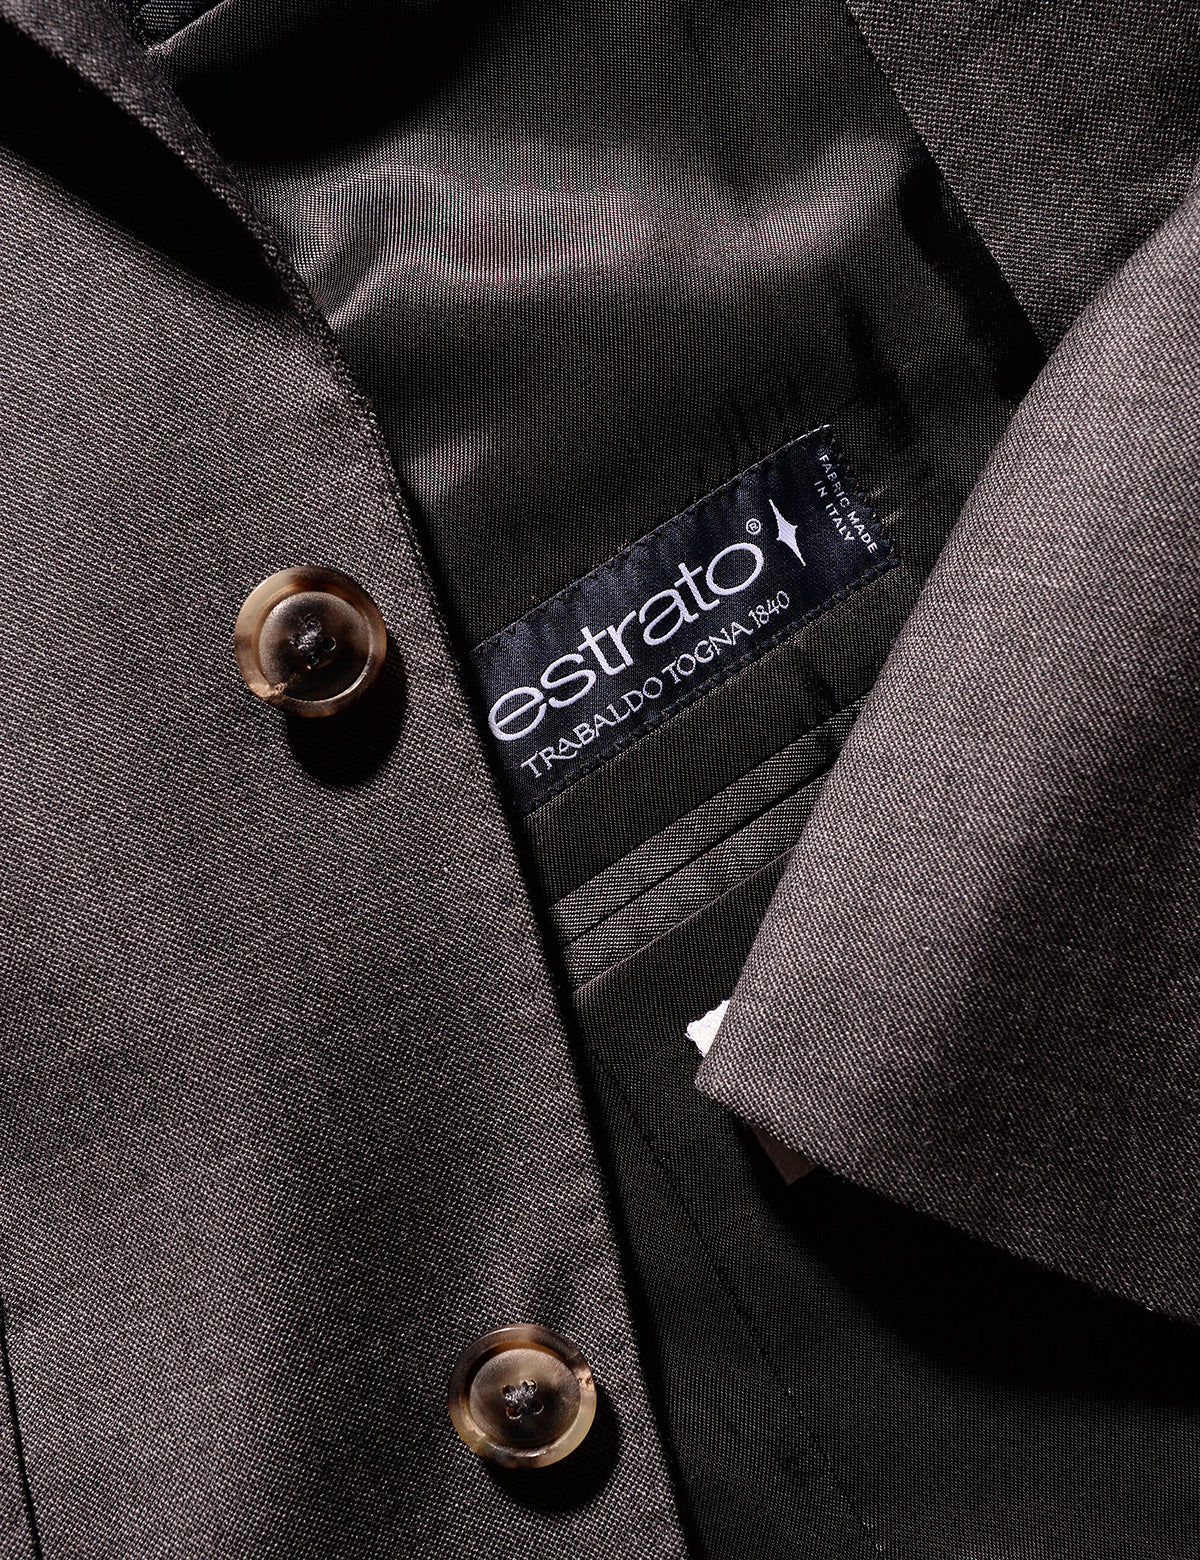 BKT50 Tailored Suit in Wool Sharkskin - Dark Gray - Jacket Detail Photo Showing Buttons, Lining and Fabric Info Label